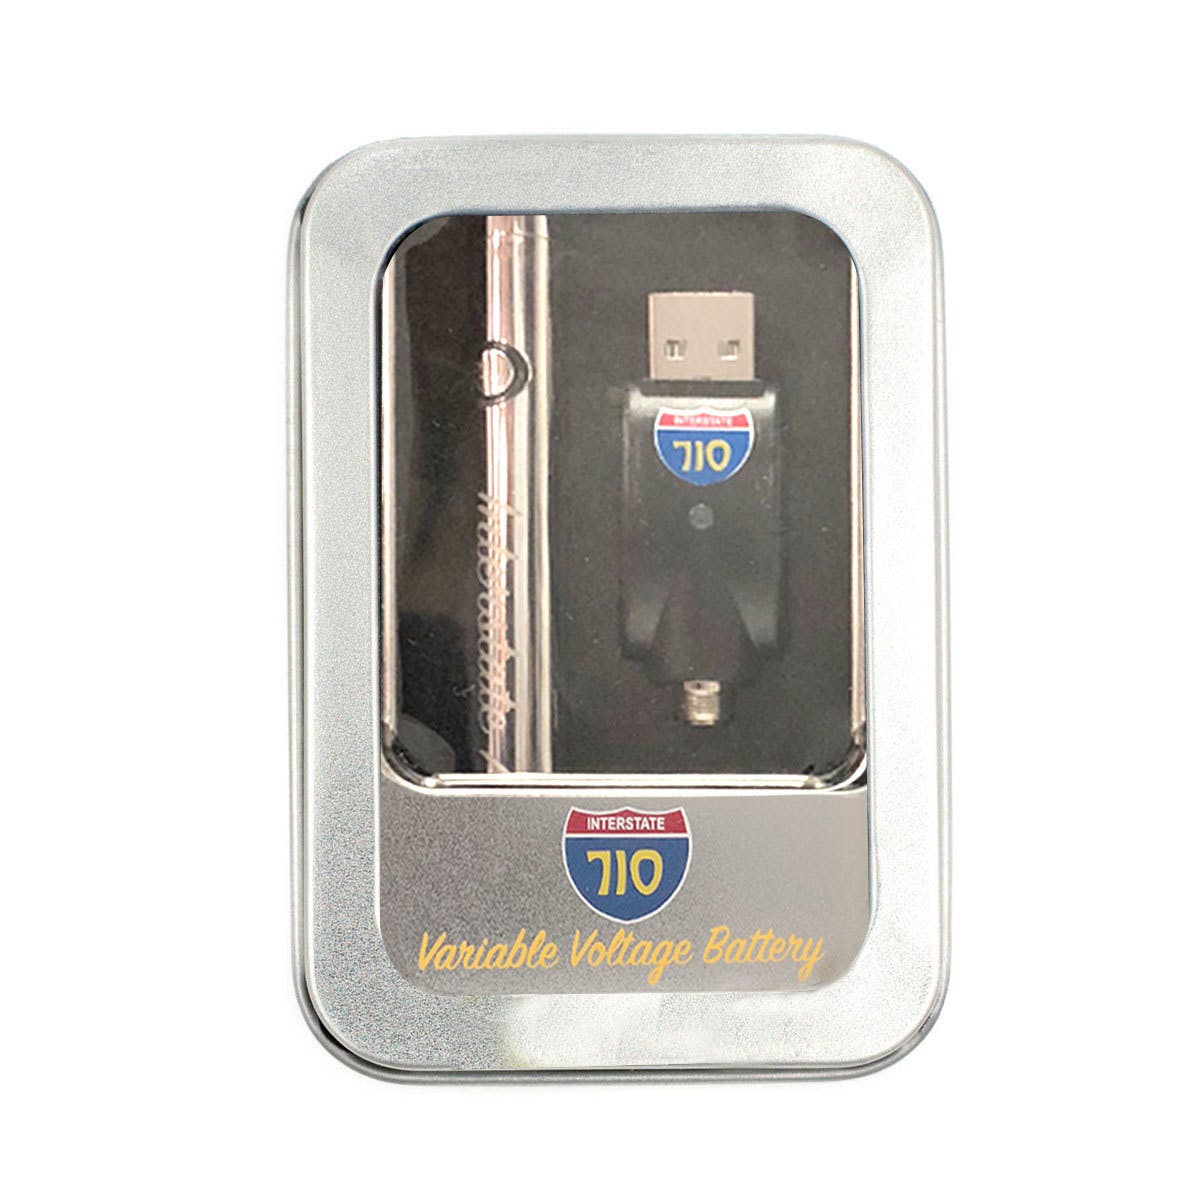 Interstate 710 Variable Voltage Battery